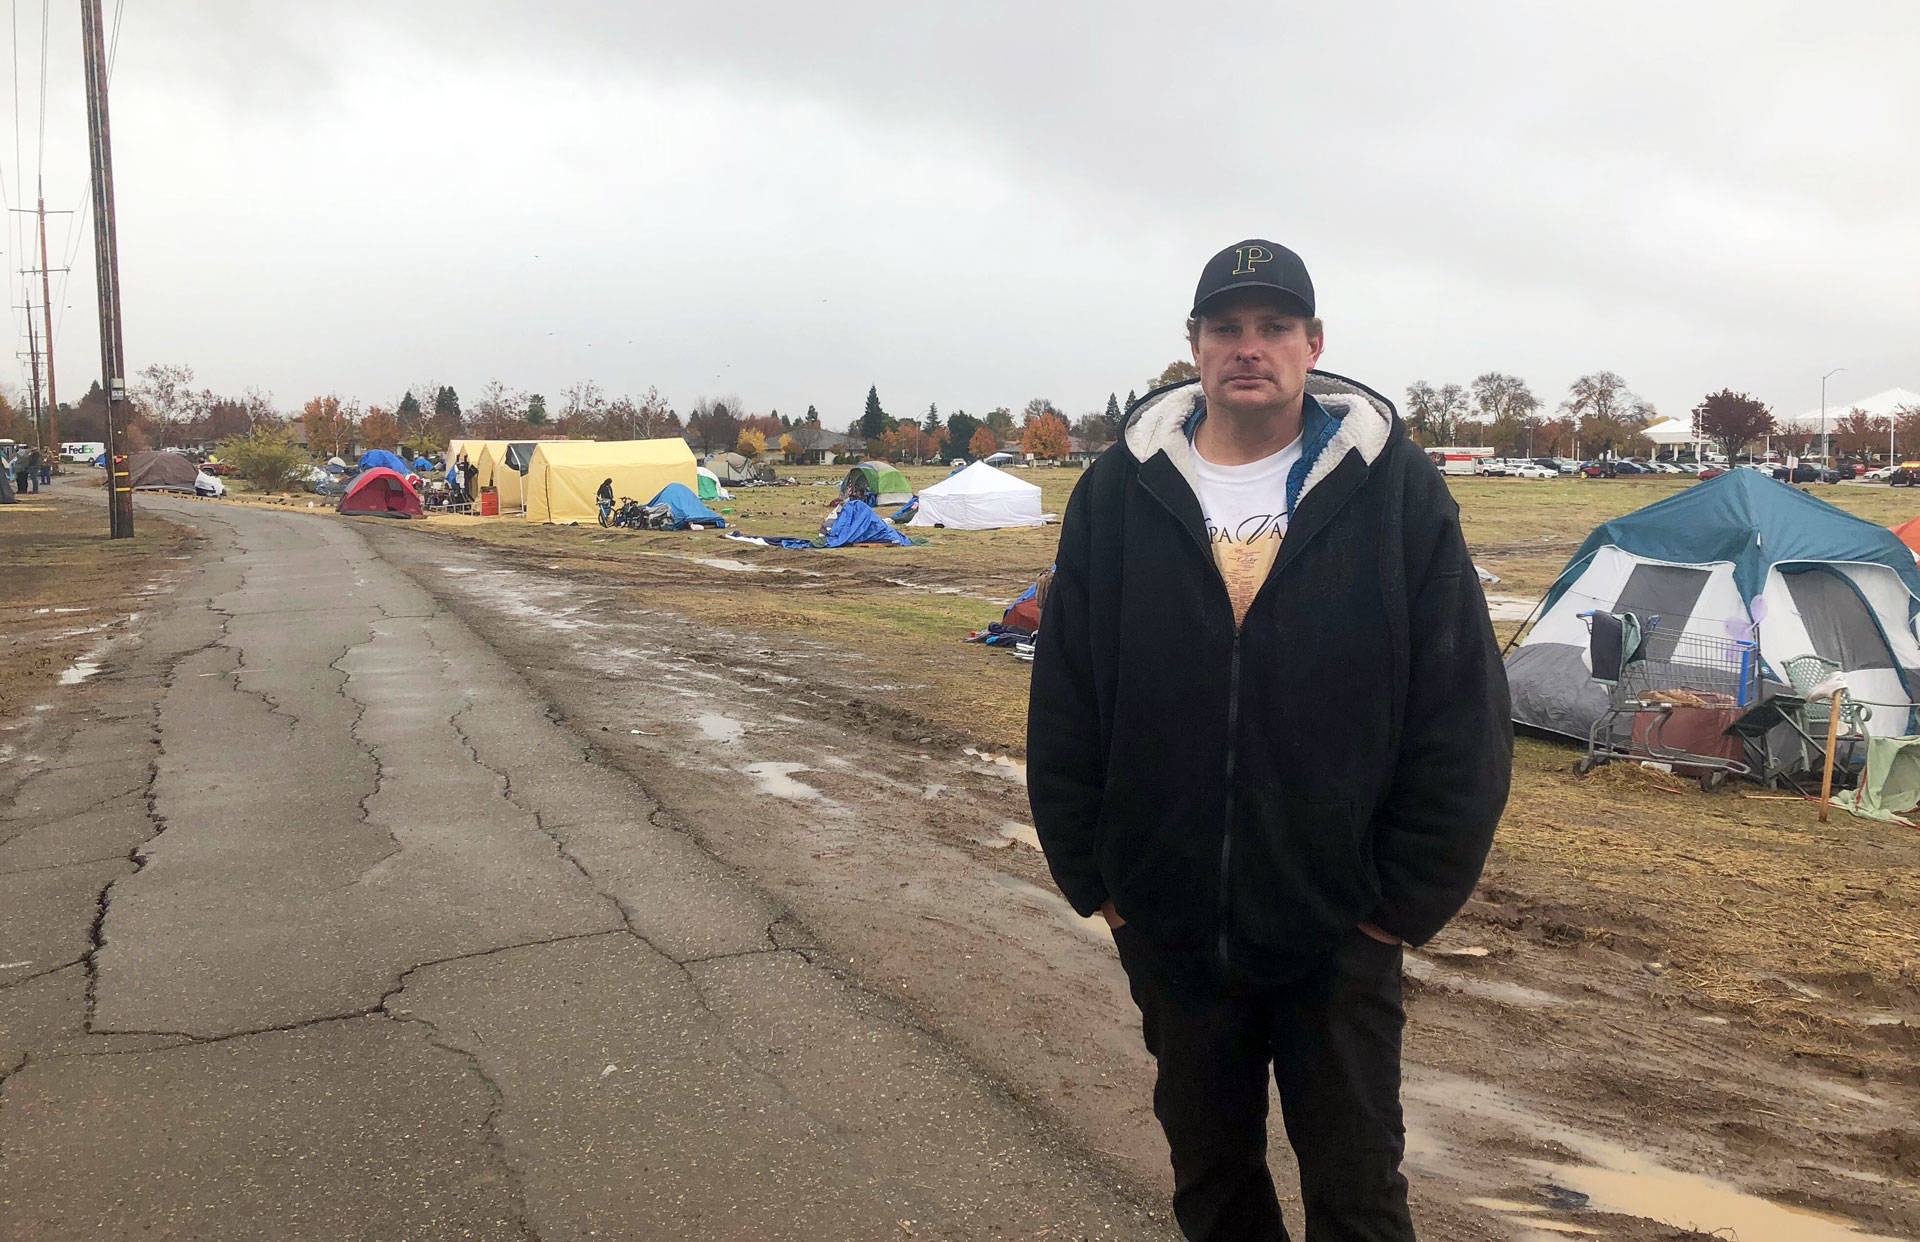 Ulis Gordon stands by several dozen tents outside a Chico Walmart where some Camp Fire survivors are staying. Sonja Hutson/KQED